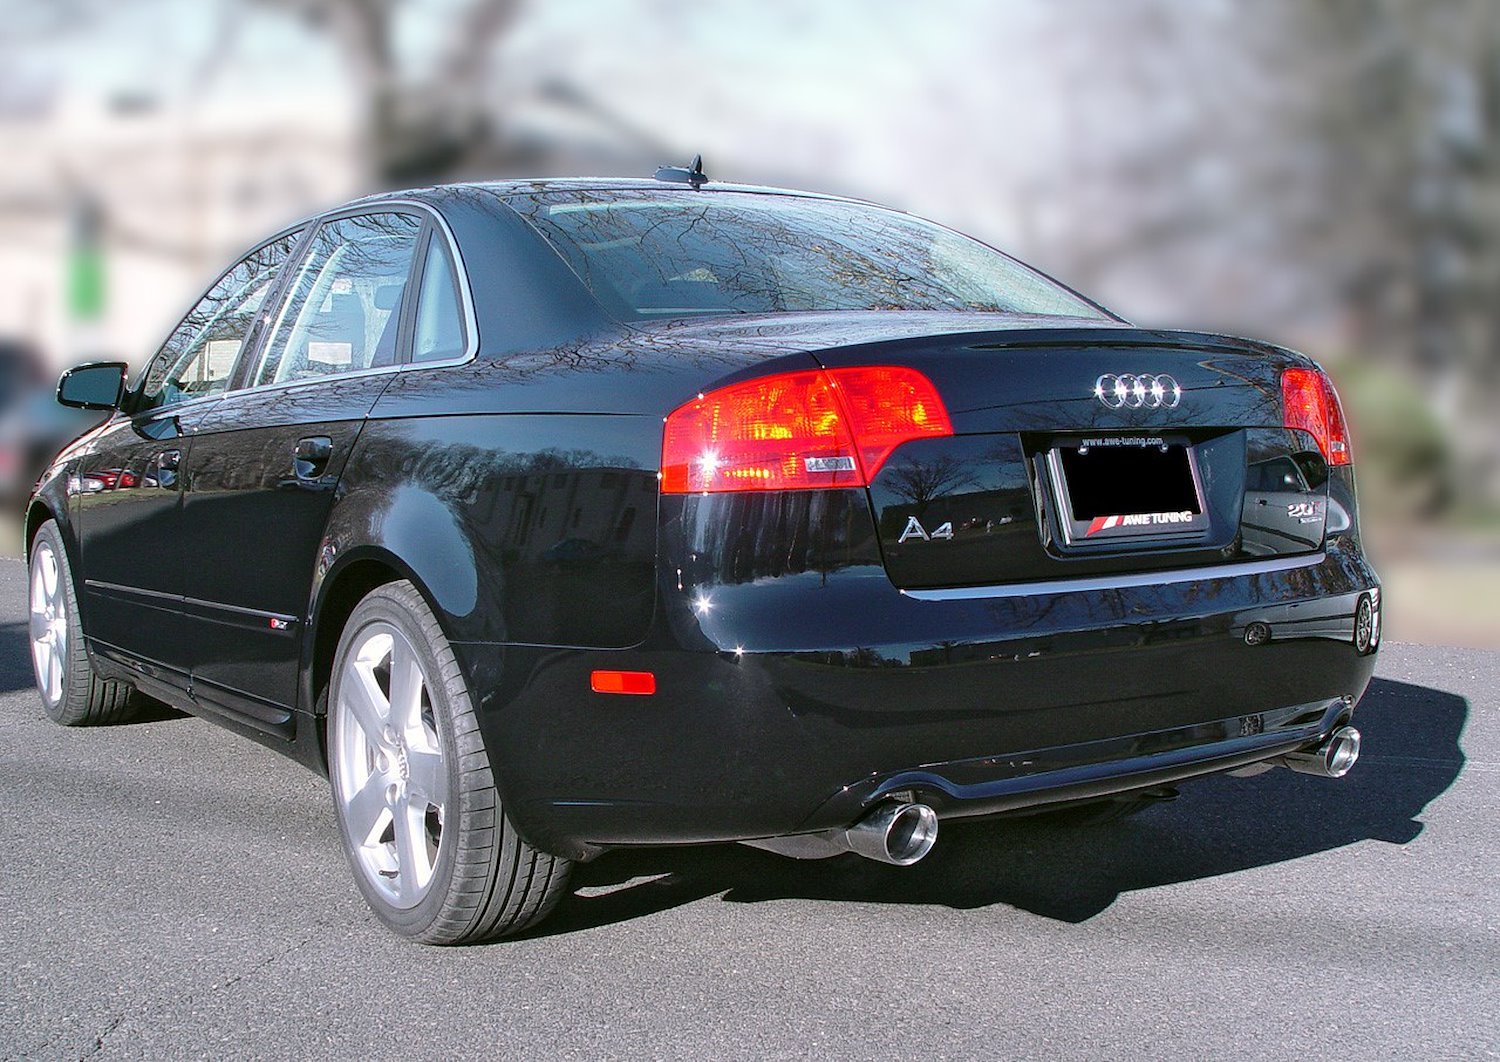 AWE Touring Edition Dual Tip Exhaust for Audi B7 A4 3.2L - Diamond Black Tips